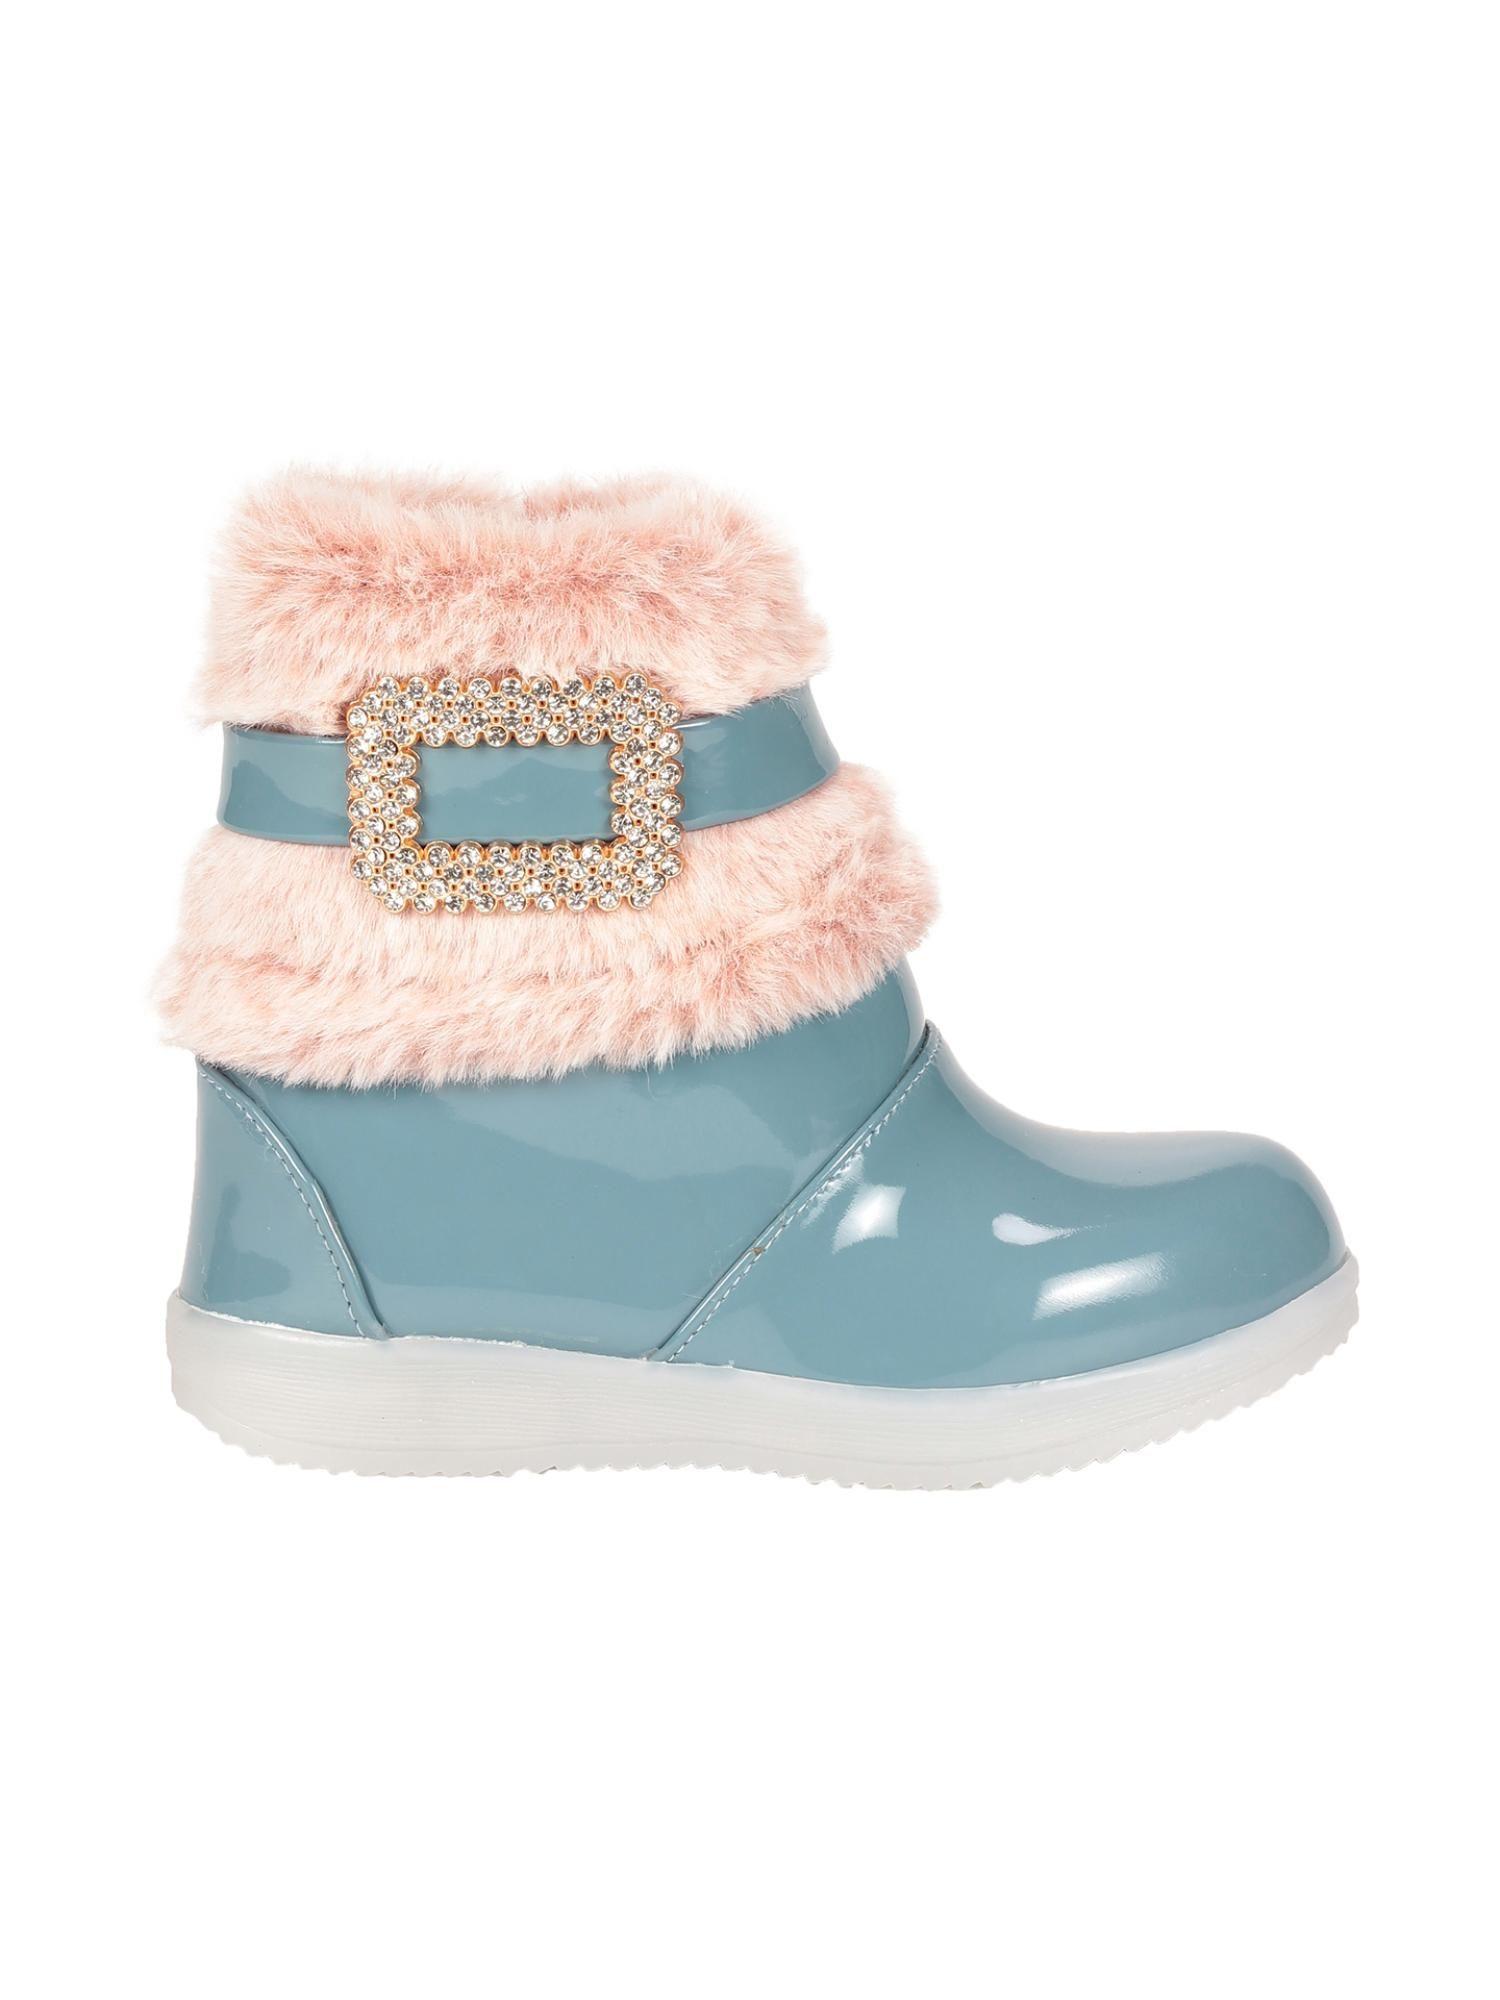 girls party boots with light - blue